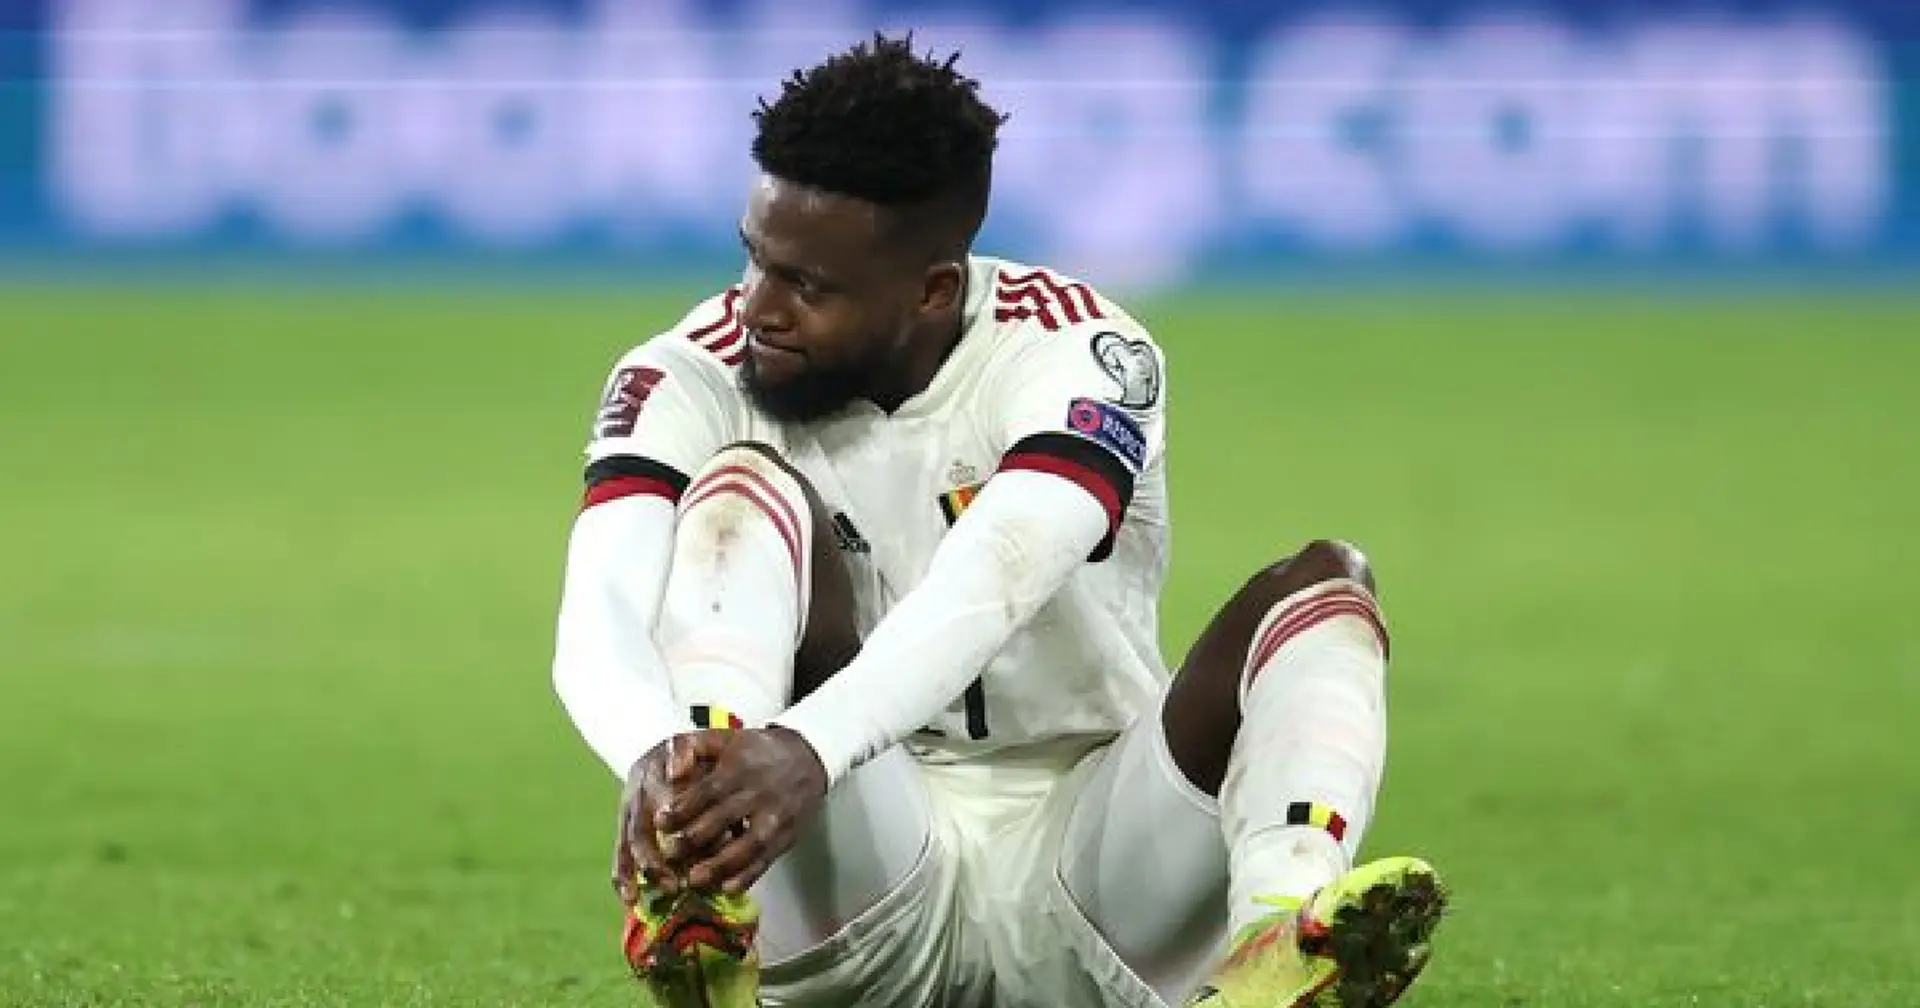 Belgium boss provides injury update on Origi after forced substitution in Wales game